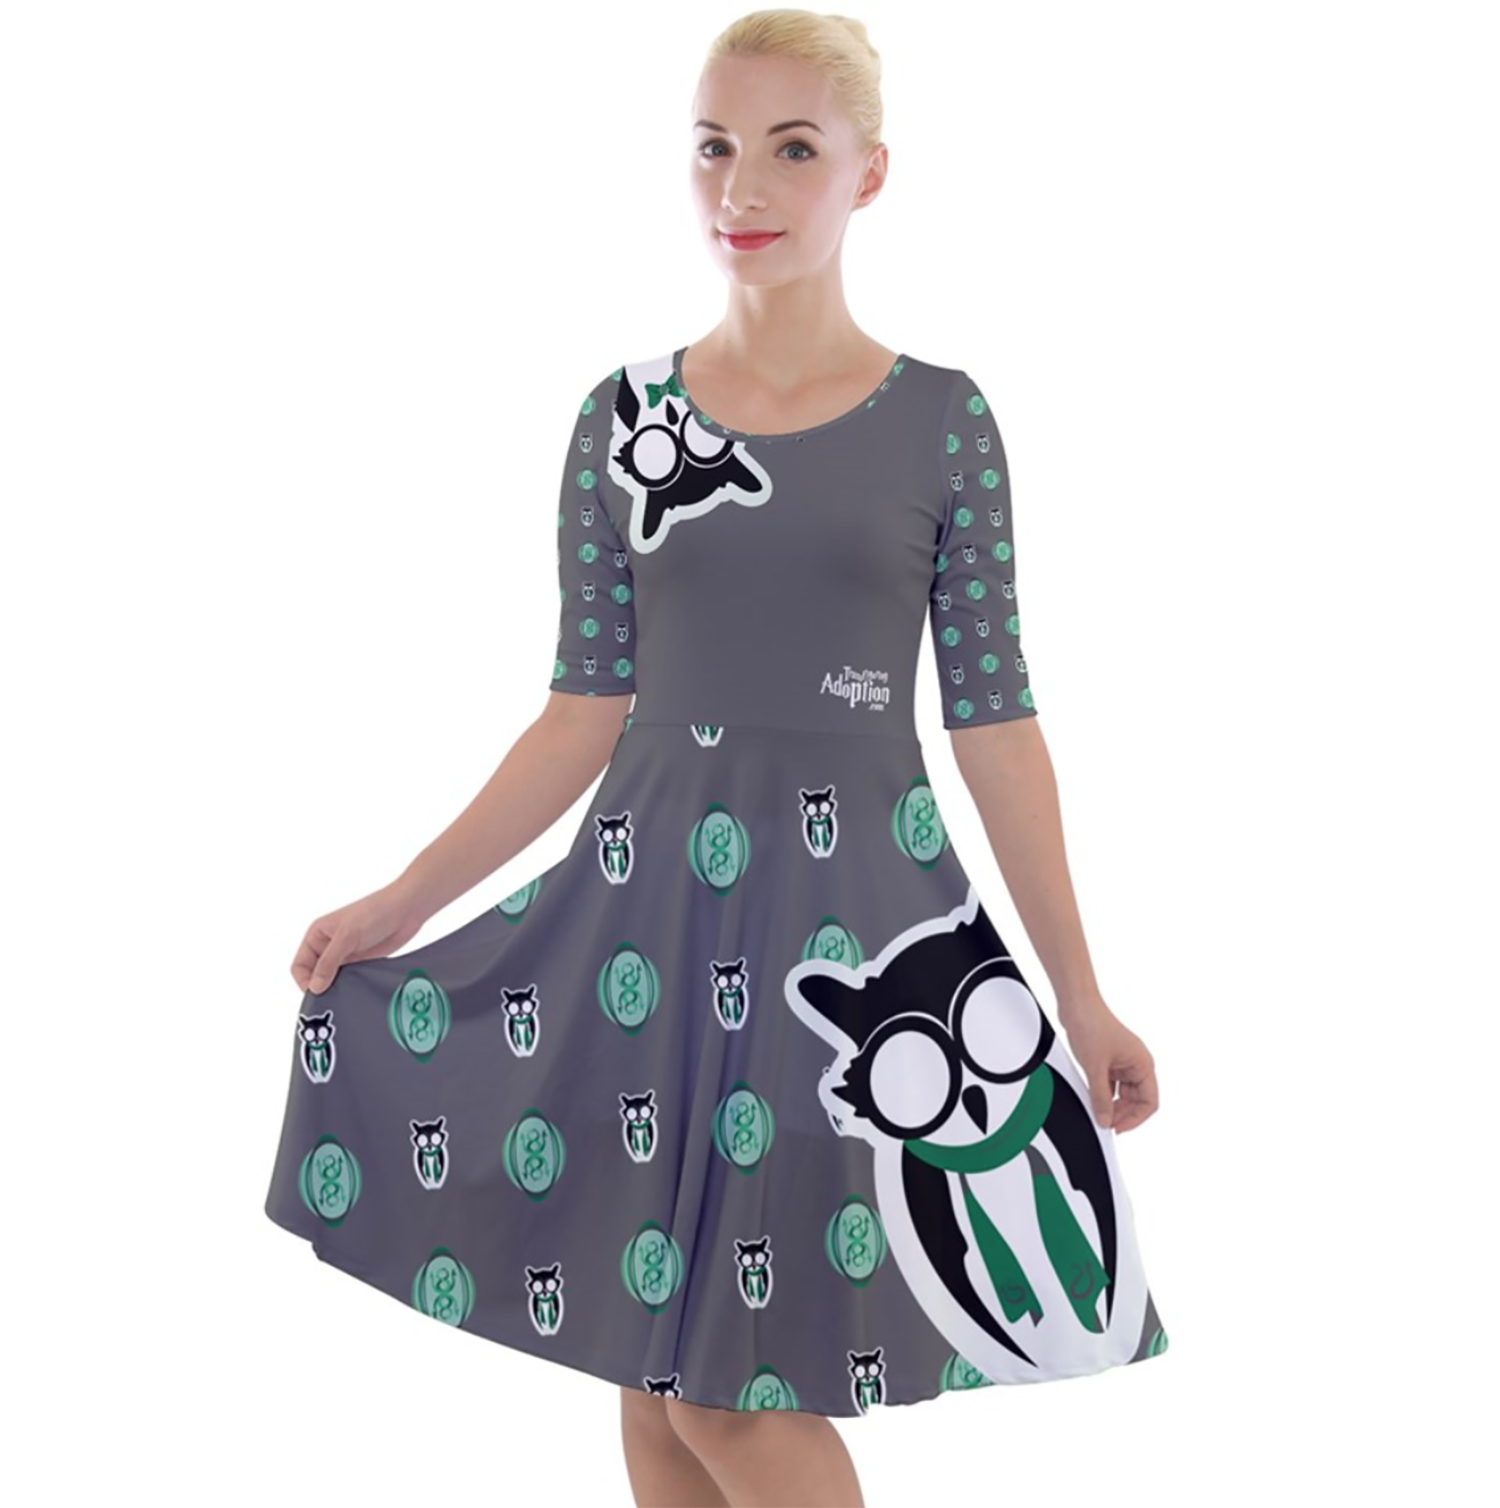 Owl (Green) Patterned Dress - Quarter Sleeve A-Line Dress - Inspired by Slytherin